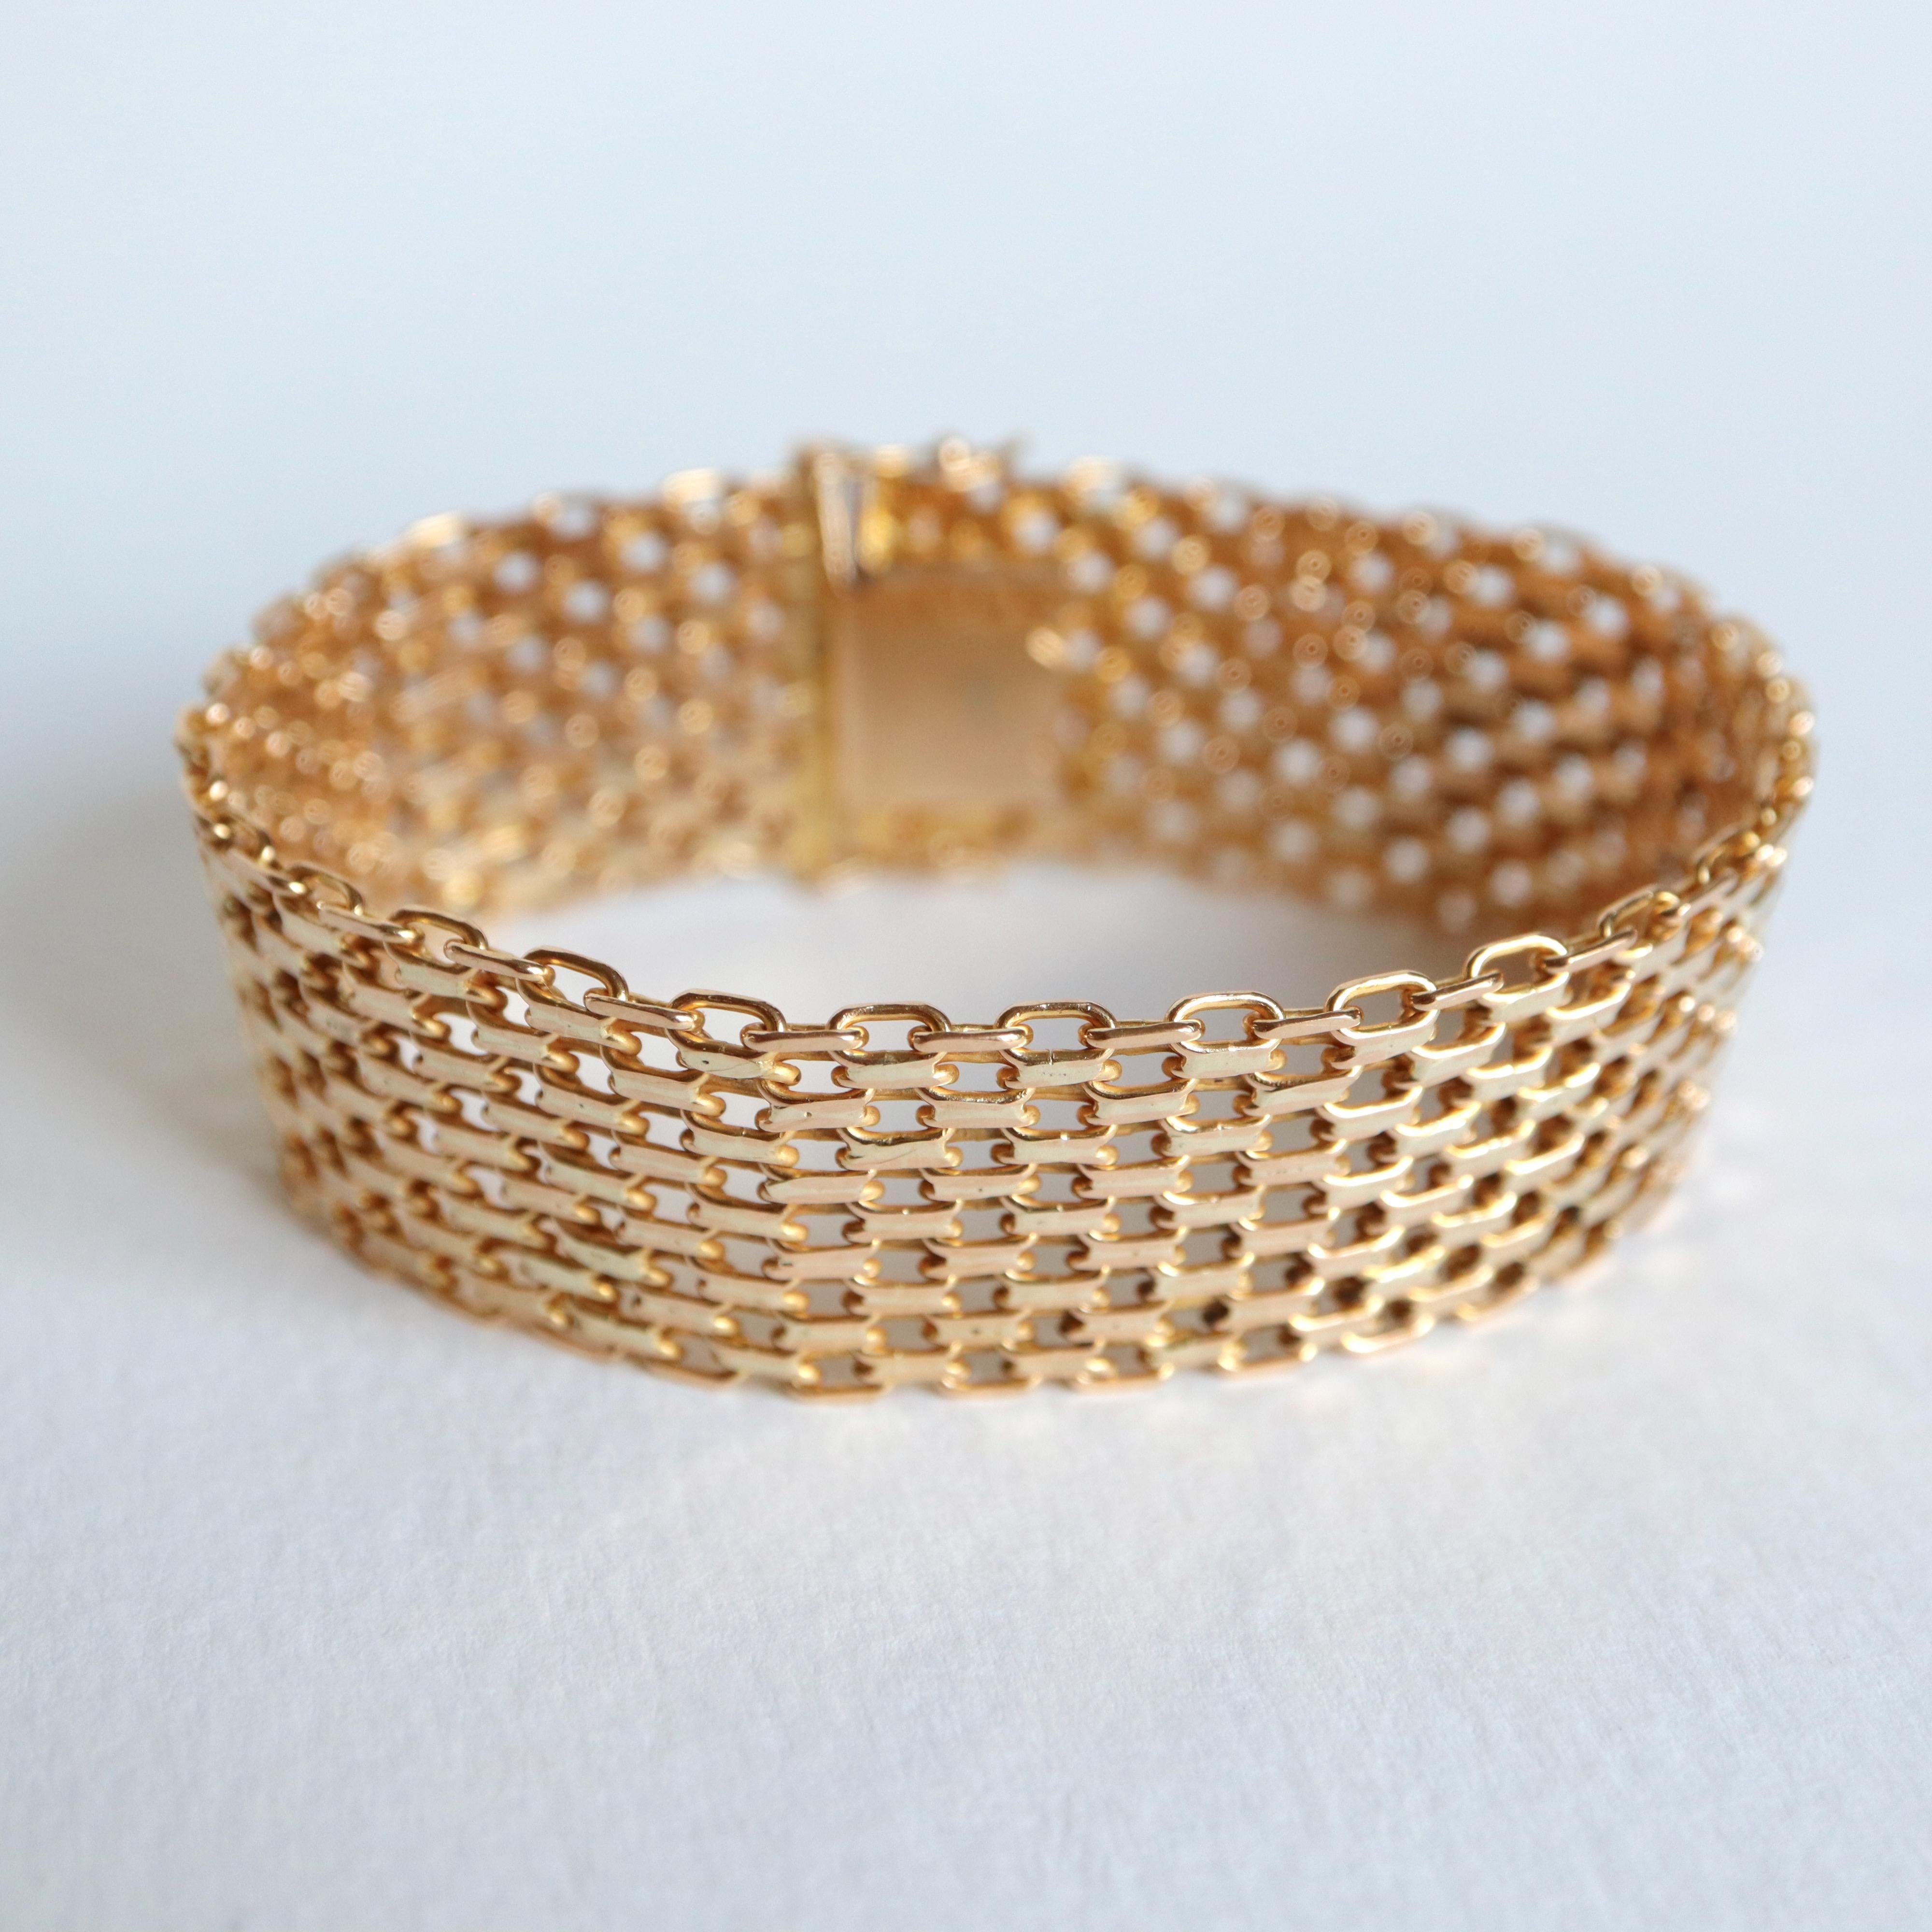 Vintage bracelet circa 1960 articulated mesh 18 kt yellow gold
Tab clasp, two safety eights
Length 19 cm Width: 2 cm Thickness: about 1.5 mm
Gold weight 48.2g. 
Eagle head hallmark